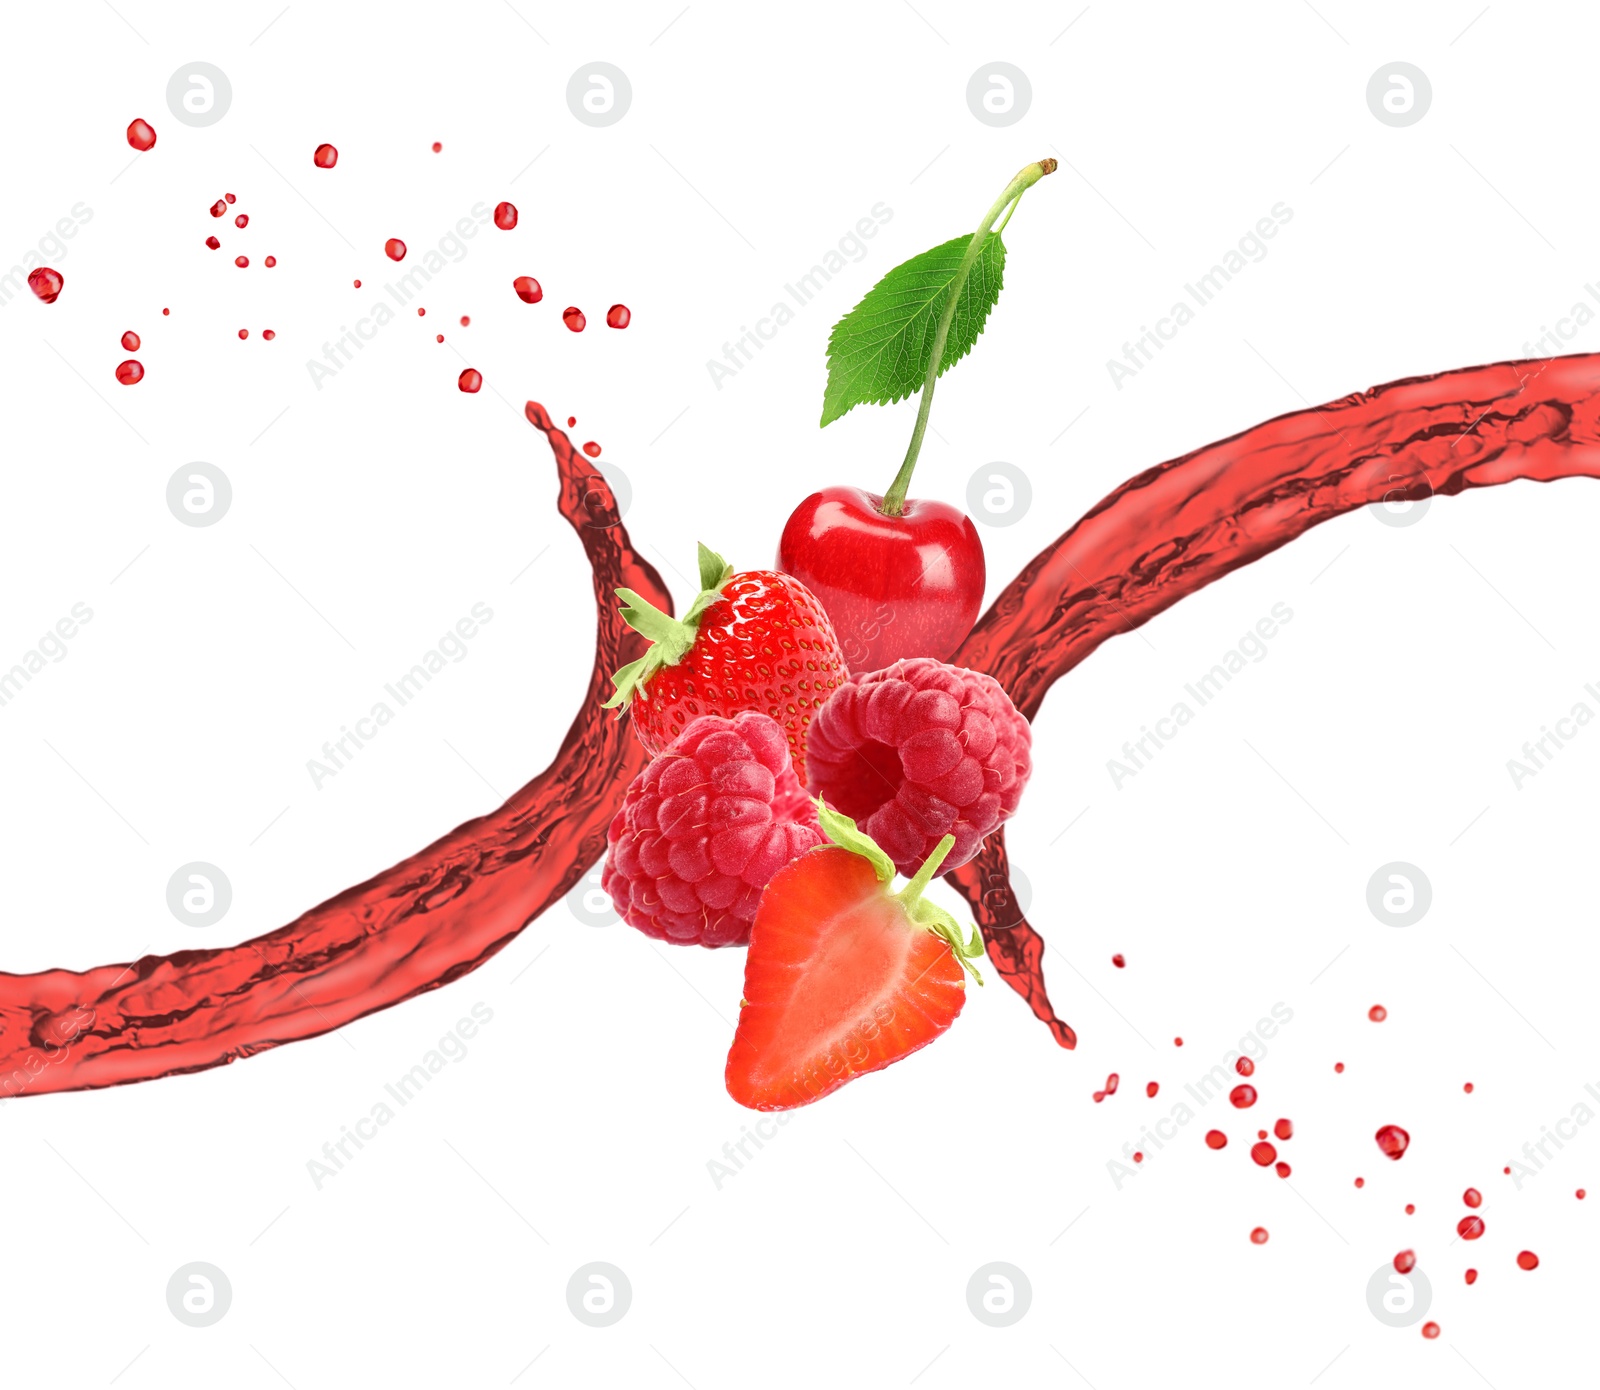 Image of Delicious ripe berries and splashes of juice on white background